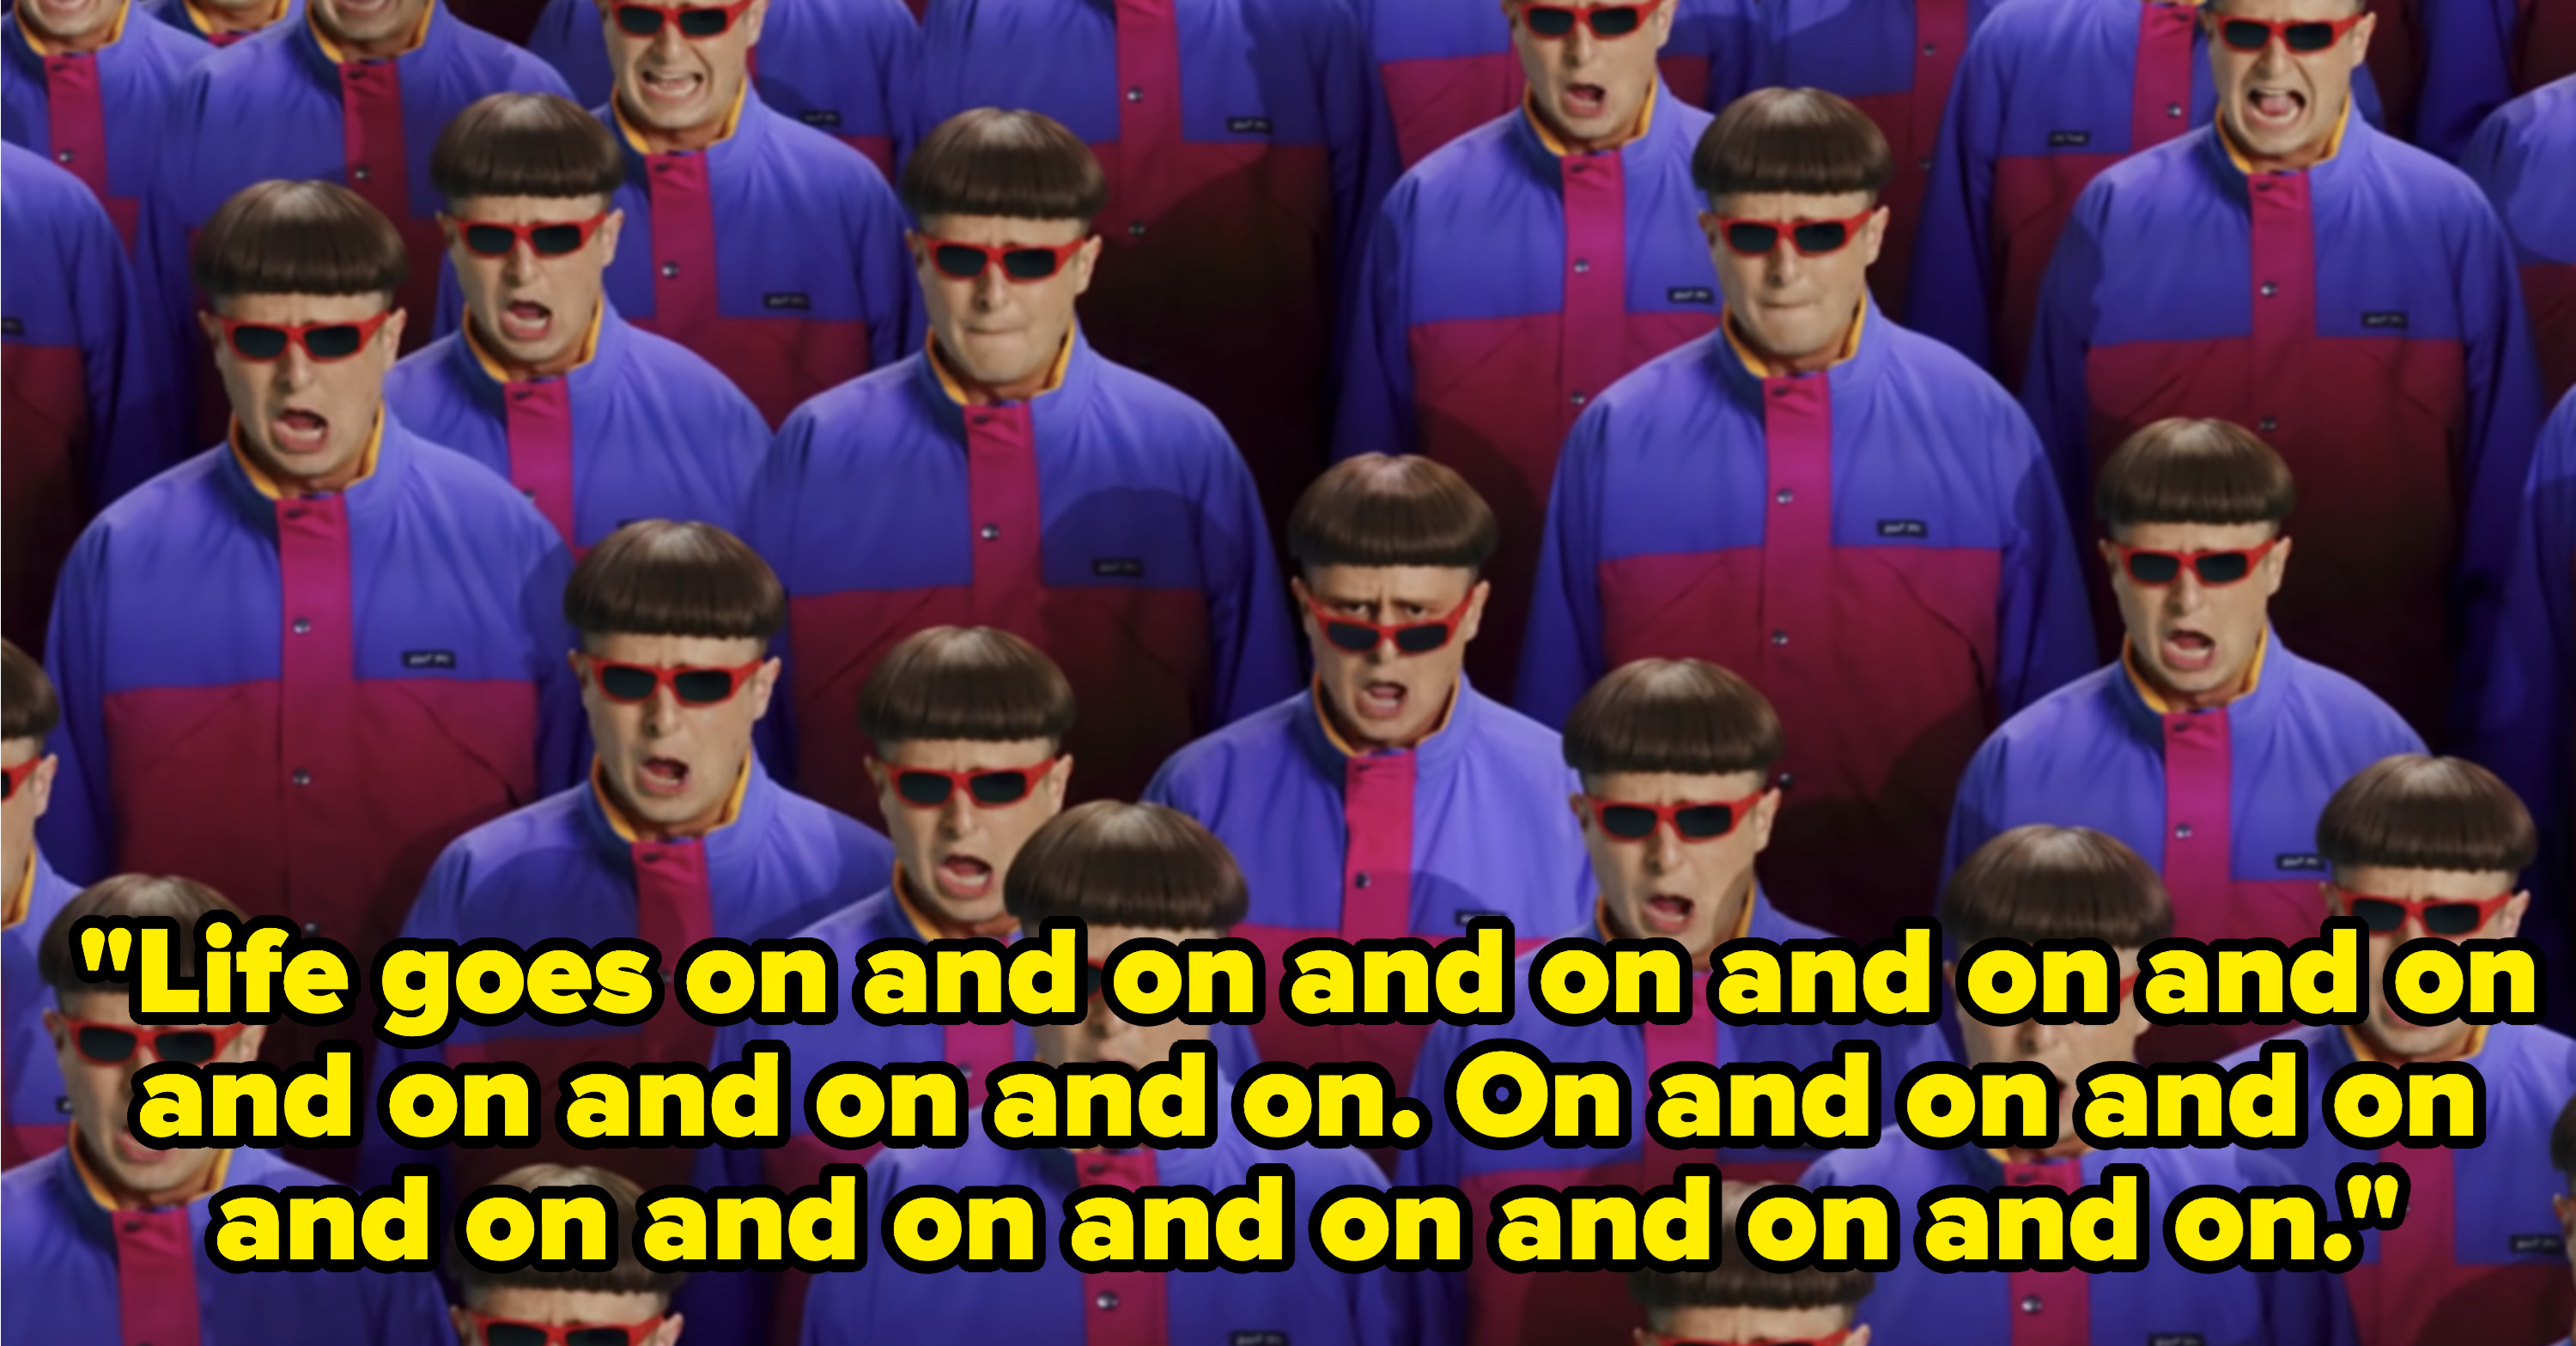 Oliver Tree sings &quot; Life goes on and on and on and on and on and on and on and on On and on and on and on and on and on and on and on&quot;